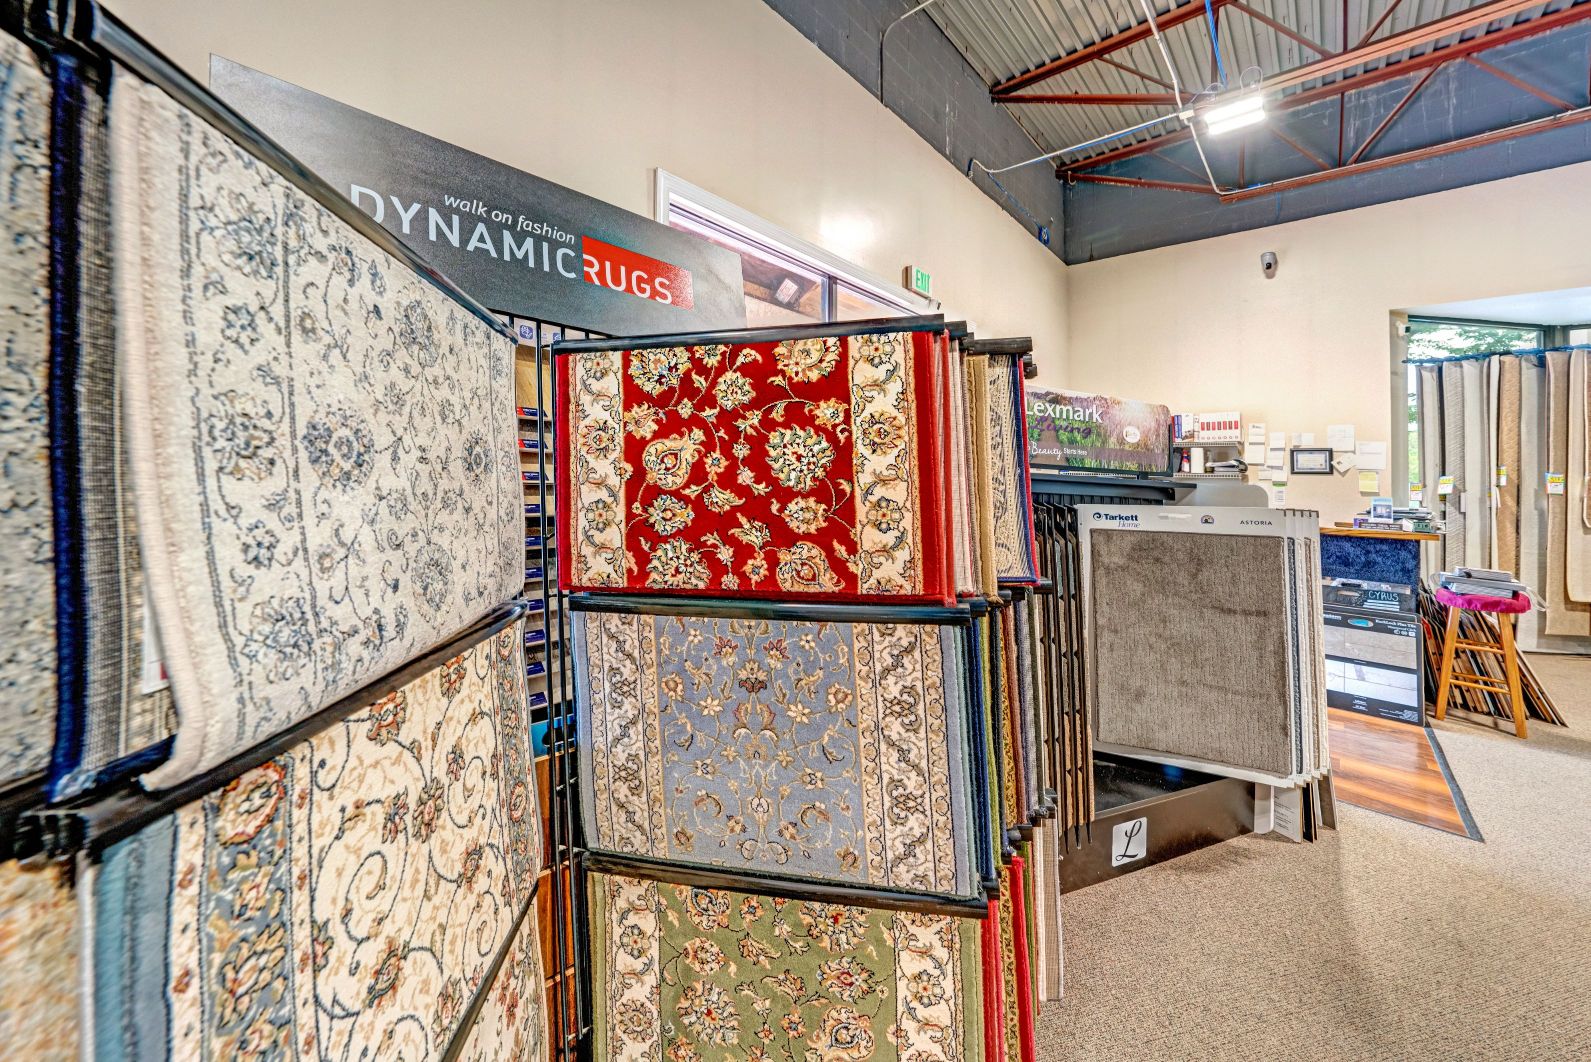 Dynamic fashion rugs display. The rugs on the display have floral designs